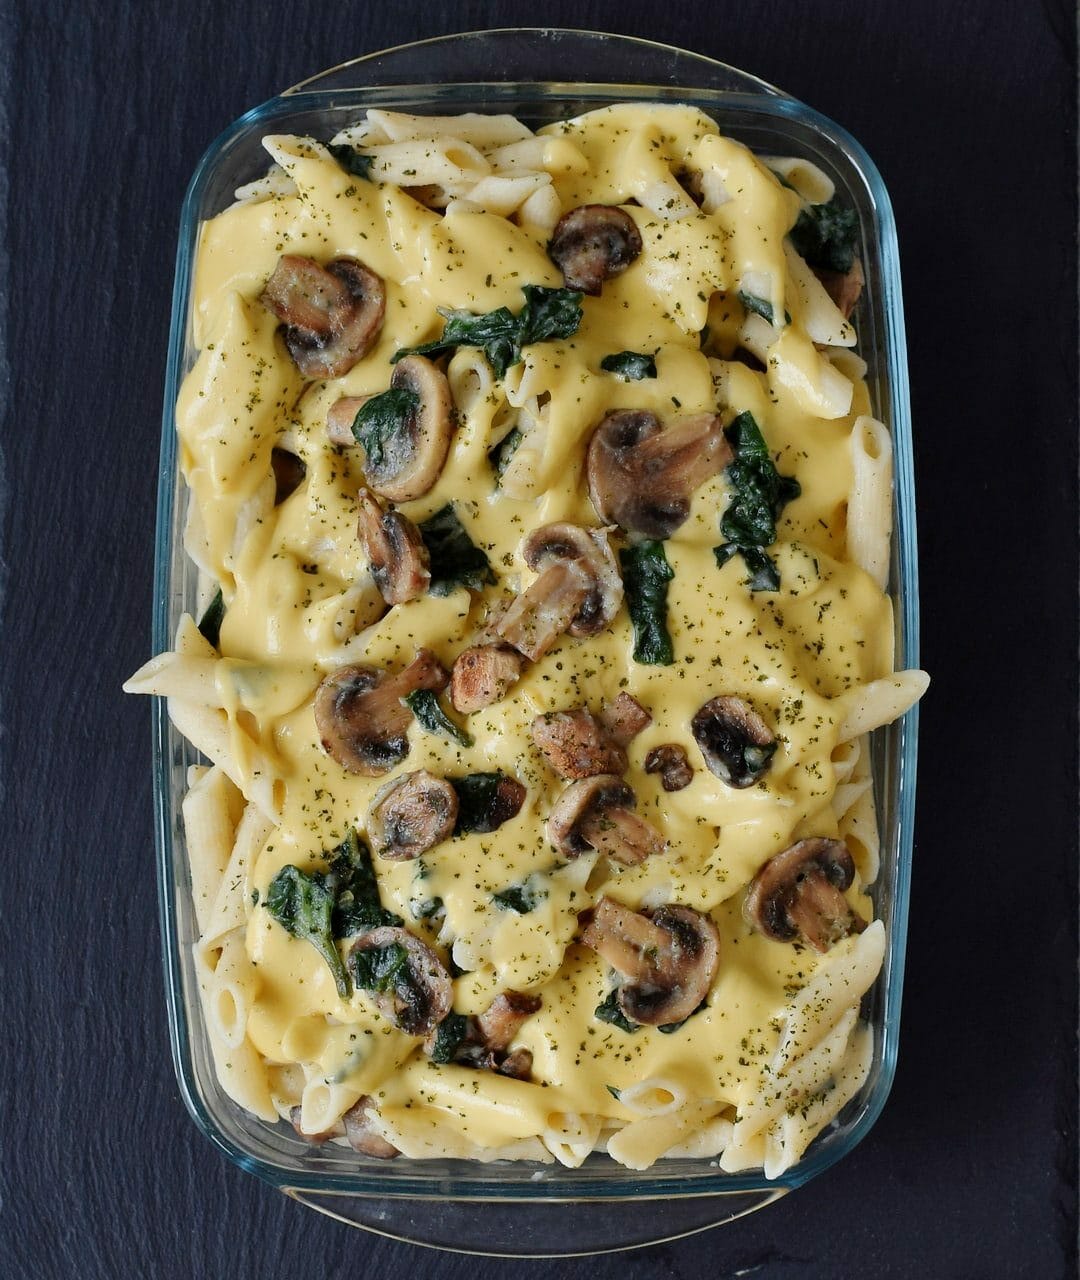 cooked pasta, mushrooms, spinach, and dairy-free cheese sauce in baking dish with creamy sauce before baking